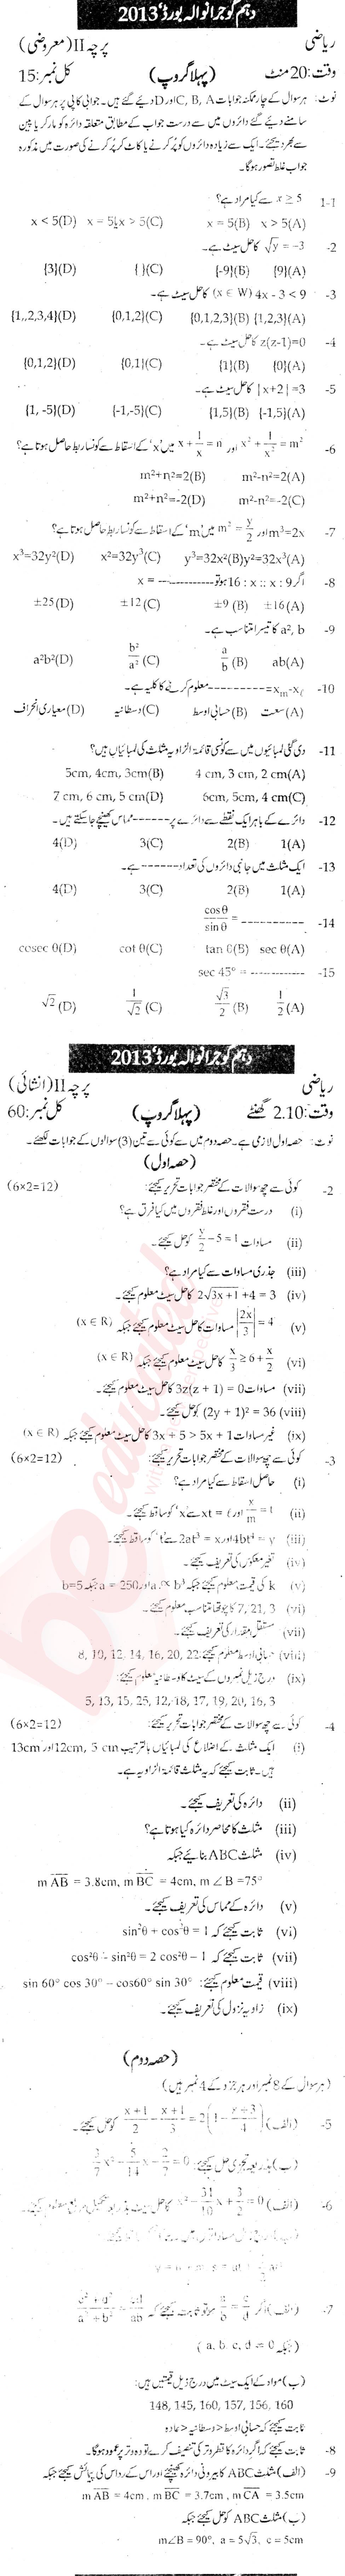 Math 10th class Past Paper Group 1 BISE Gujranwala 2013